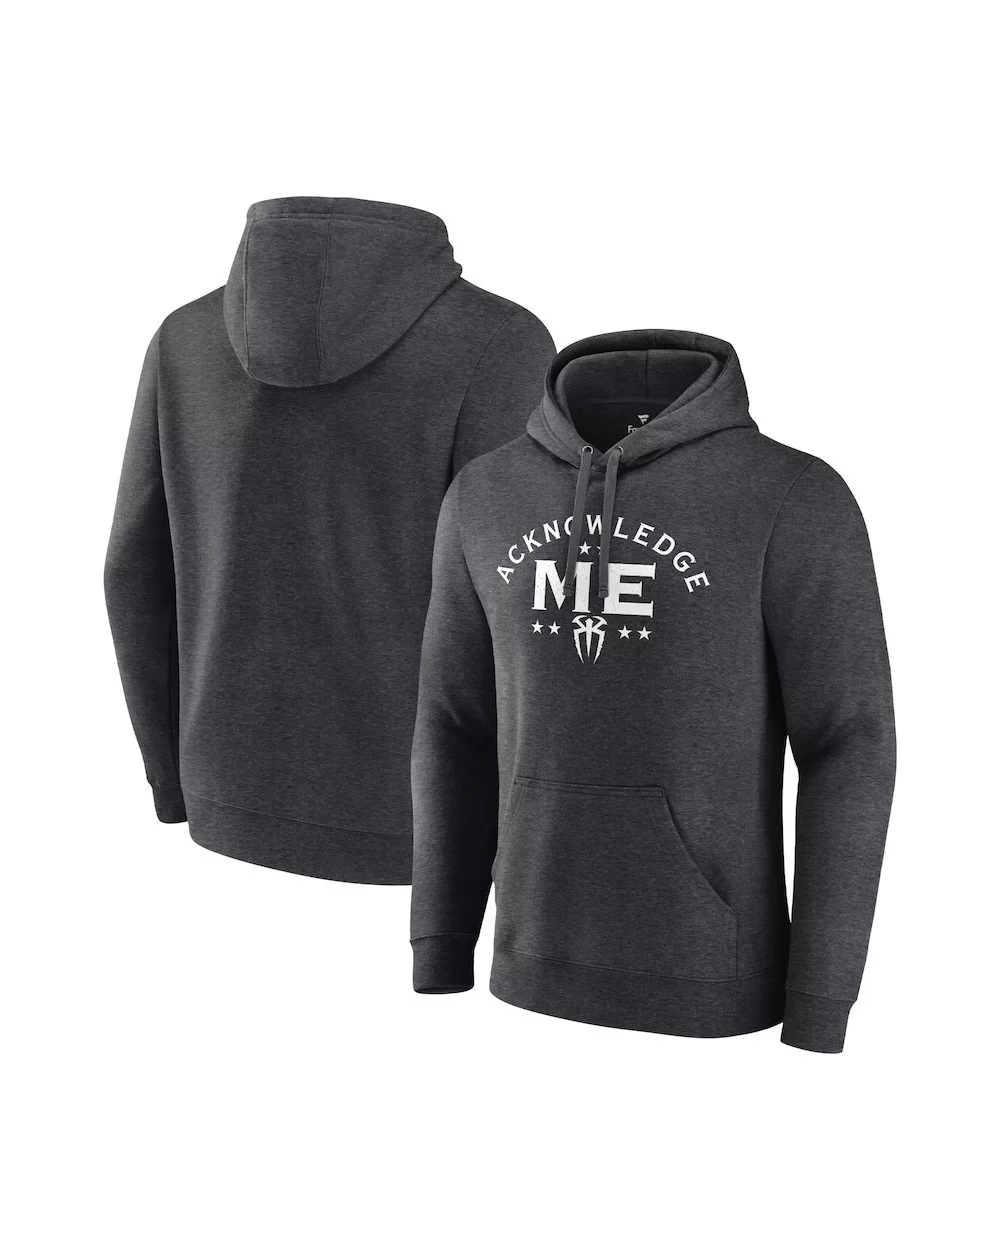 Men's Charcoal Roman Reigns Logo Acknowledge Me Pullover Hoodie $12.80 Apparel